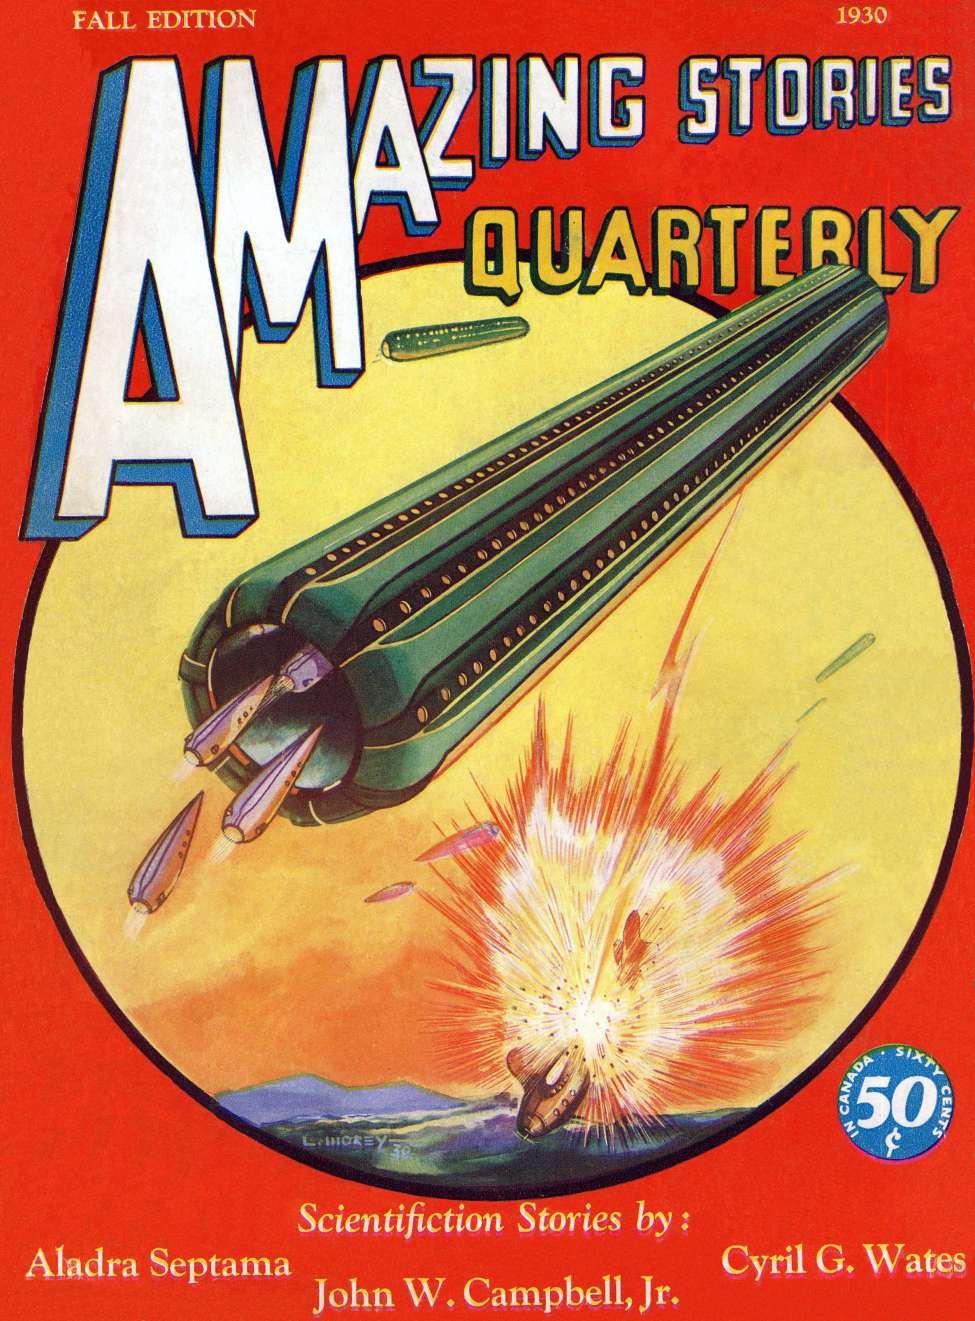 Comic Book Cover For Amazing Stories Quarterly v3 4 - A Modern Prometheus - Cyril G. Wates